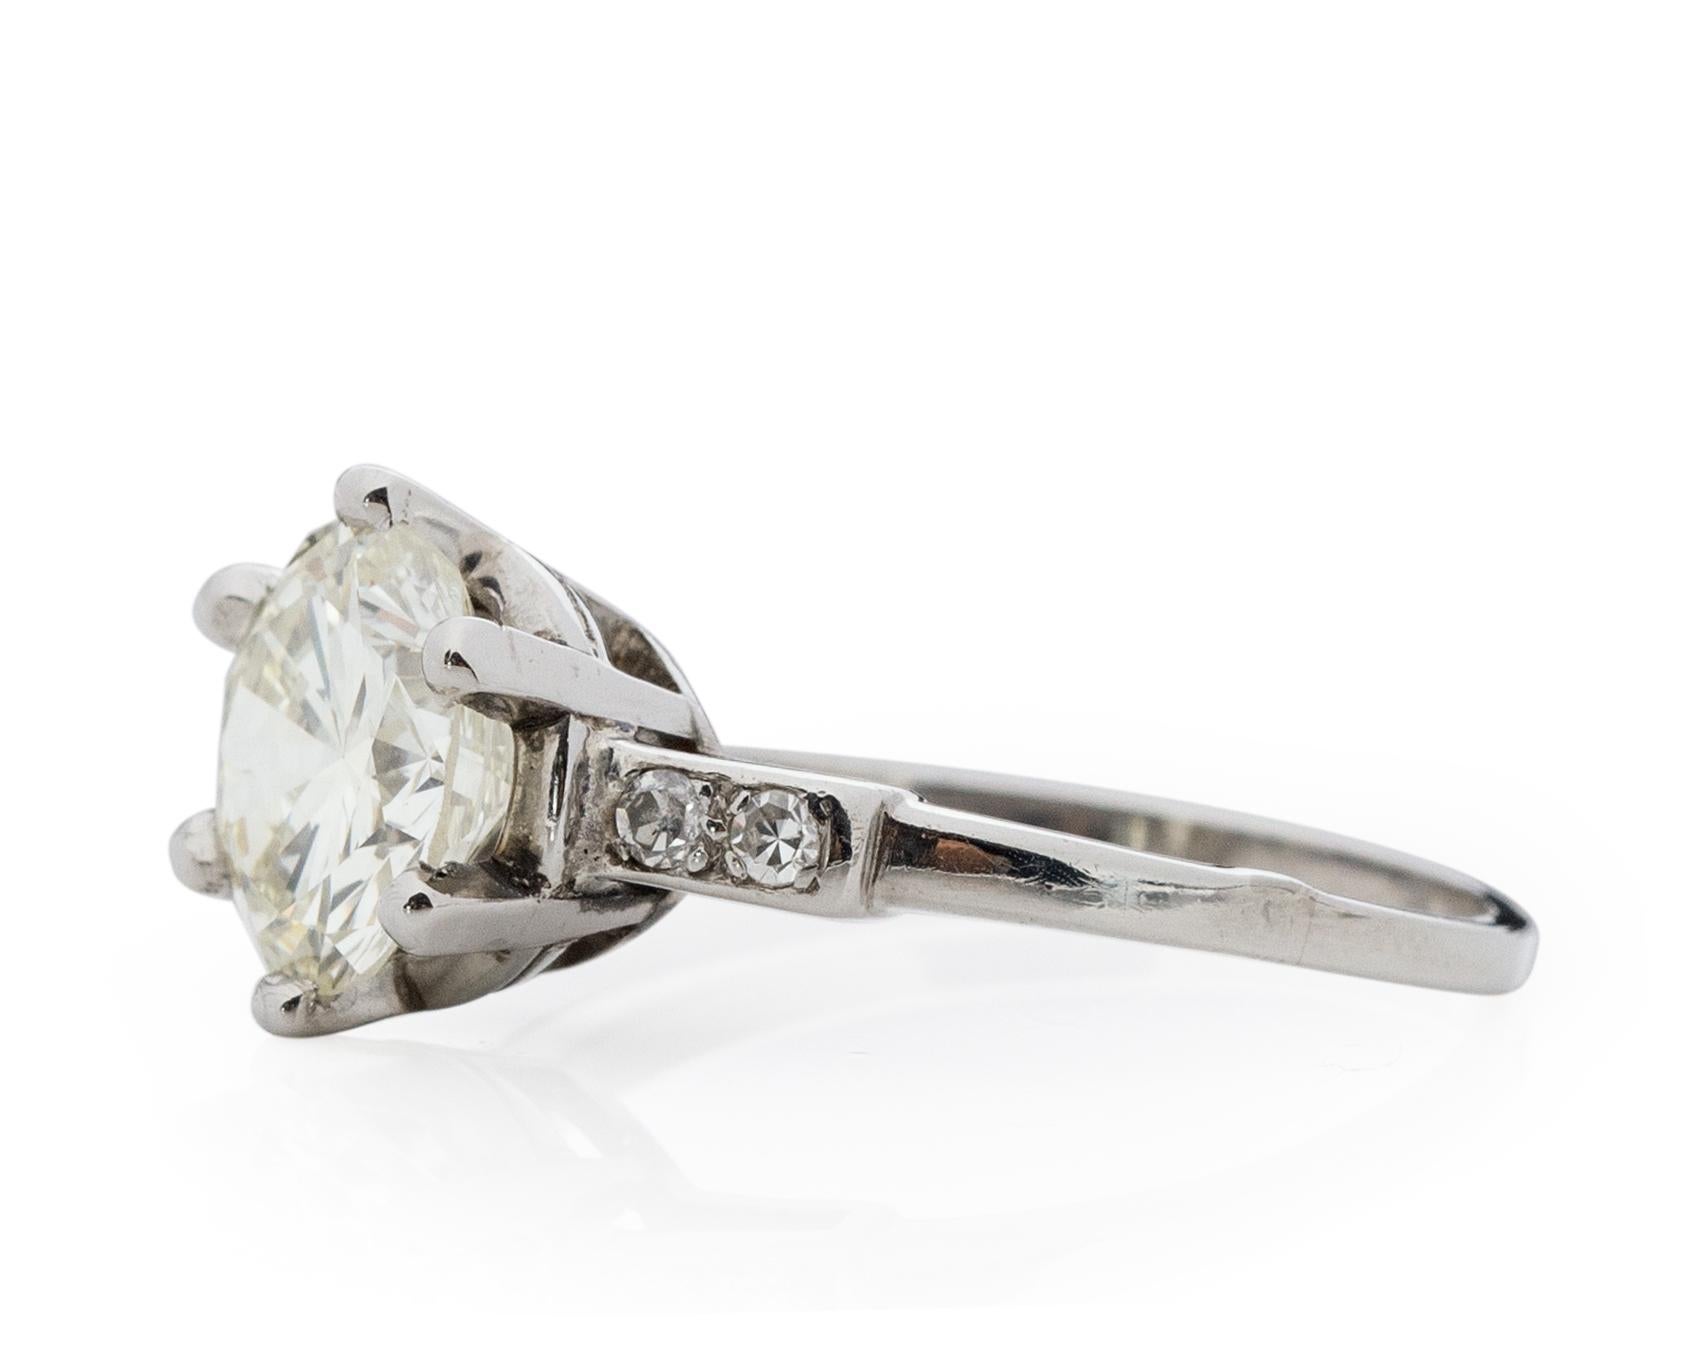 Here we have an beautiful example of an Art Deco era engagement ring! This genuine 1940's era ring features a stunning 2 Carat GIA certified transition cut diamond set beautifully in a simple yet elegant platinum ring. The beautifully crafted